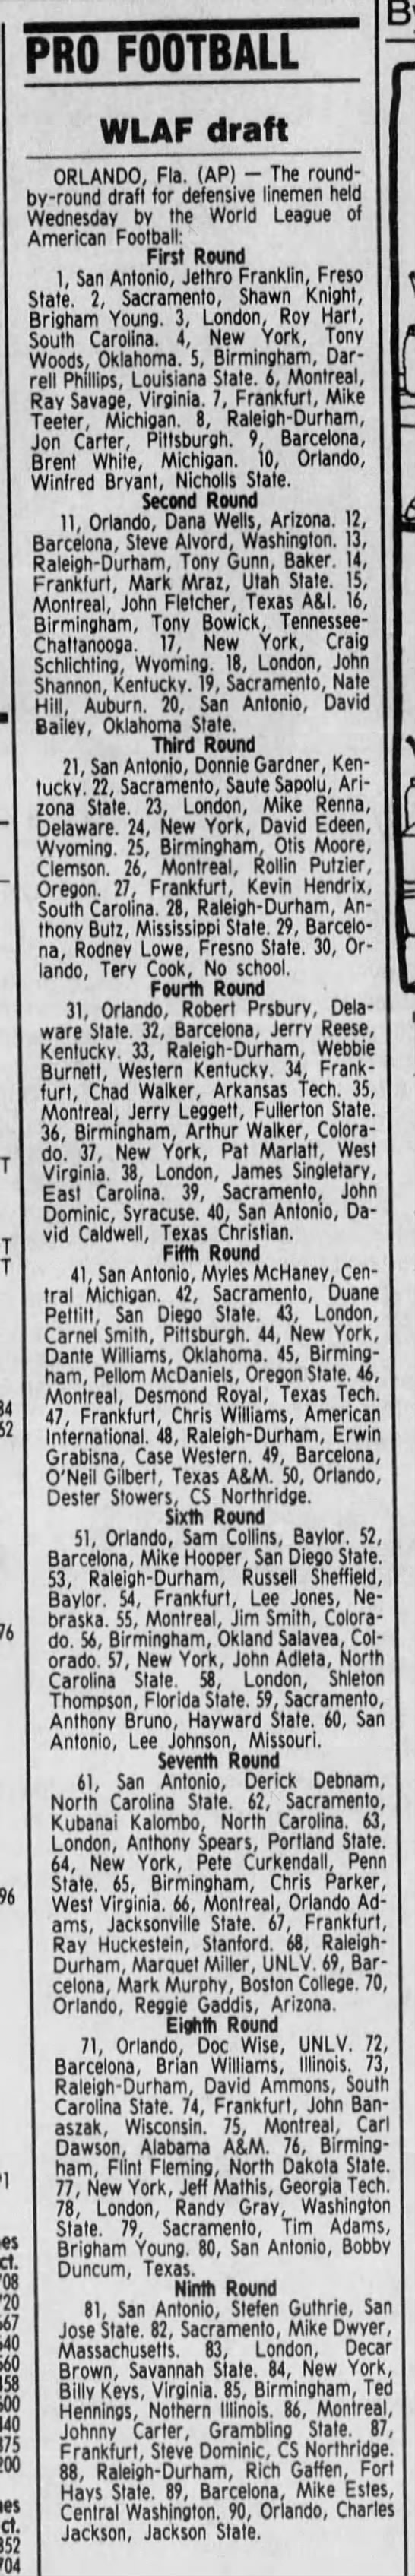 A listing of all the players drafted in the 1991 WLAF draft. - 